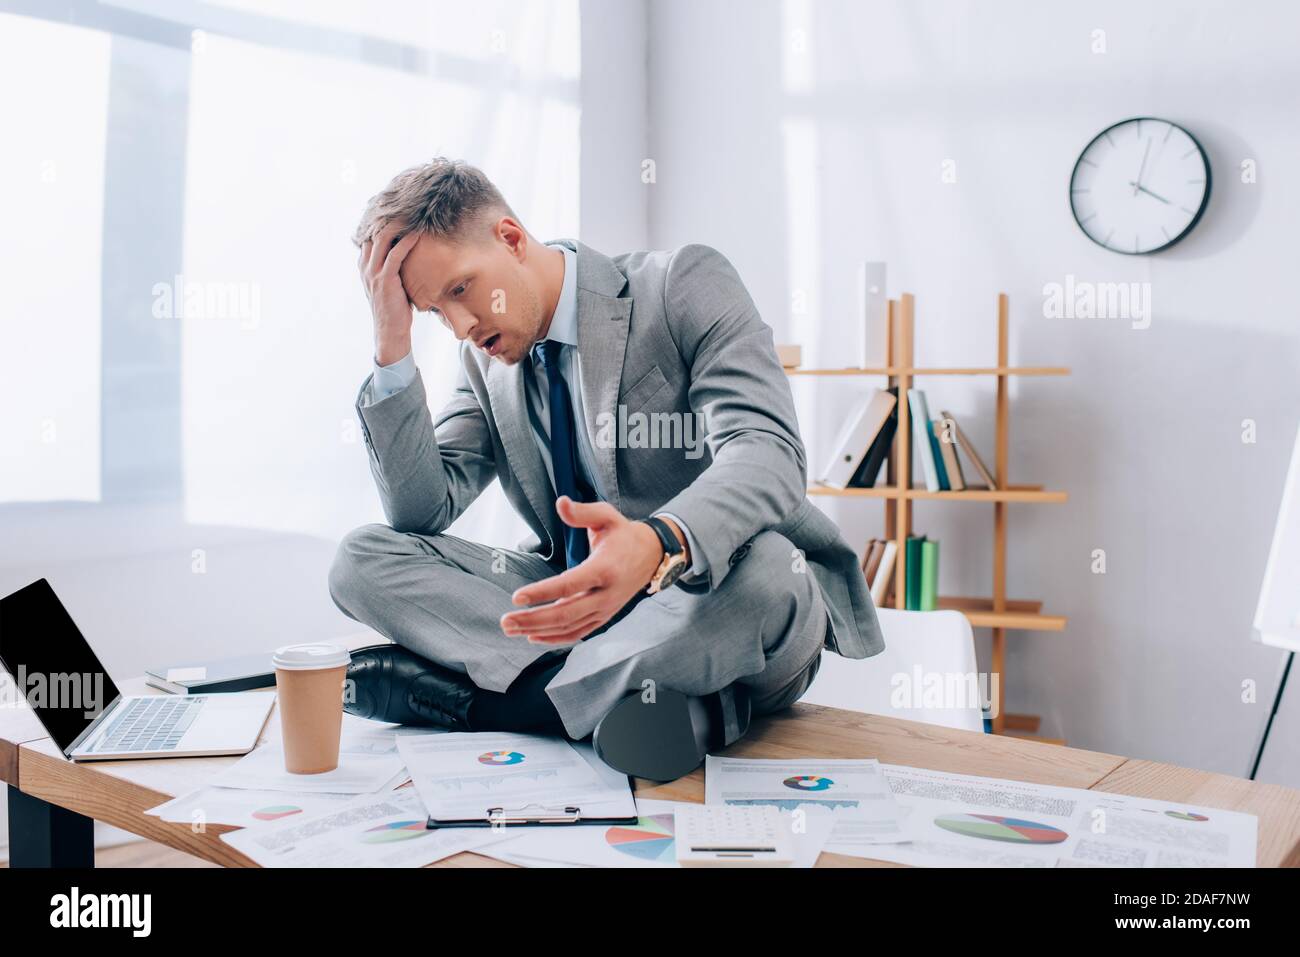 Thoughtful businessman sitting near laptop, papers and coffee to go on table in office Stock Photo